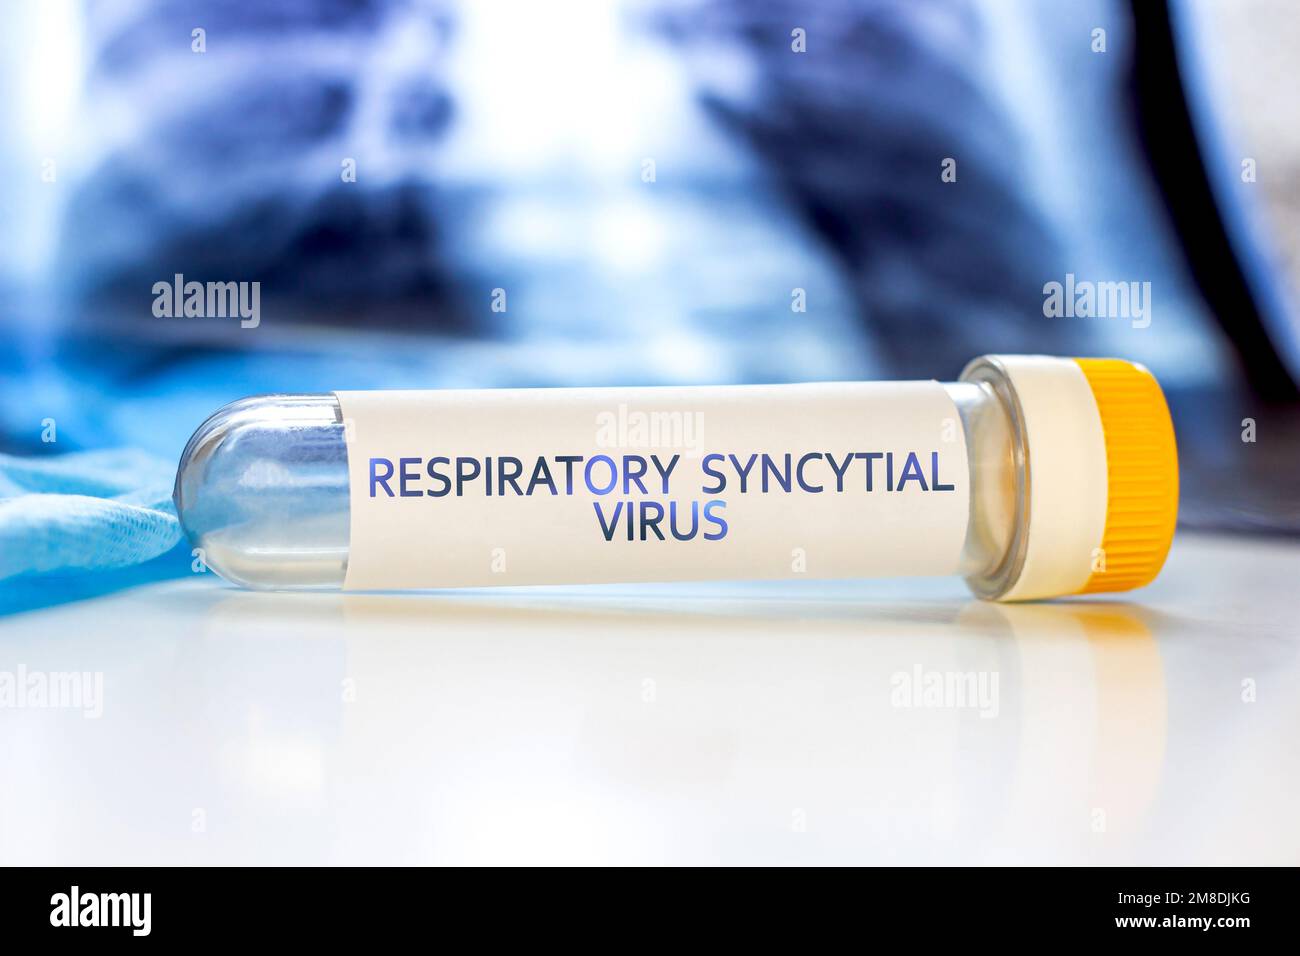 Respiratory Syncytial Virus with lung ct scan aside on light blue background. RSV disease concept. Stock Photo